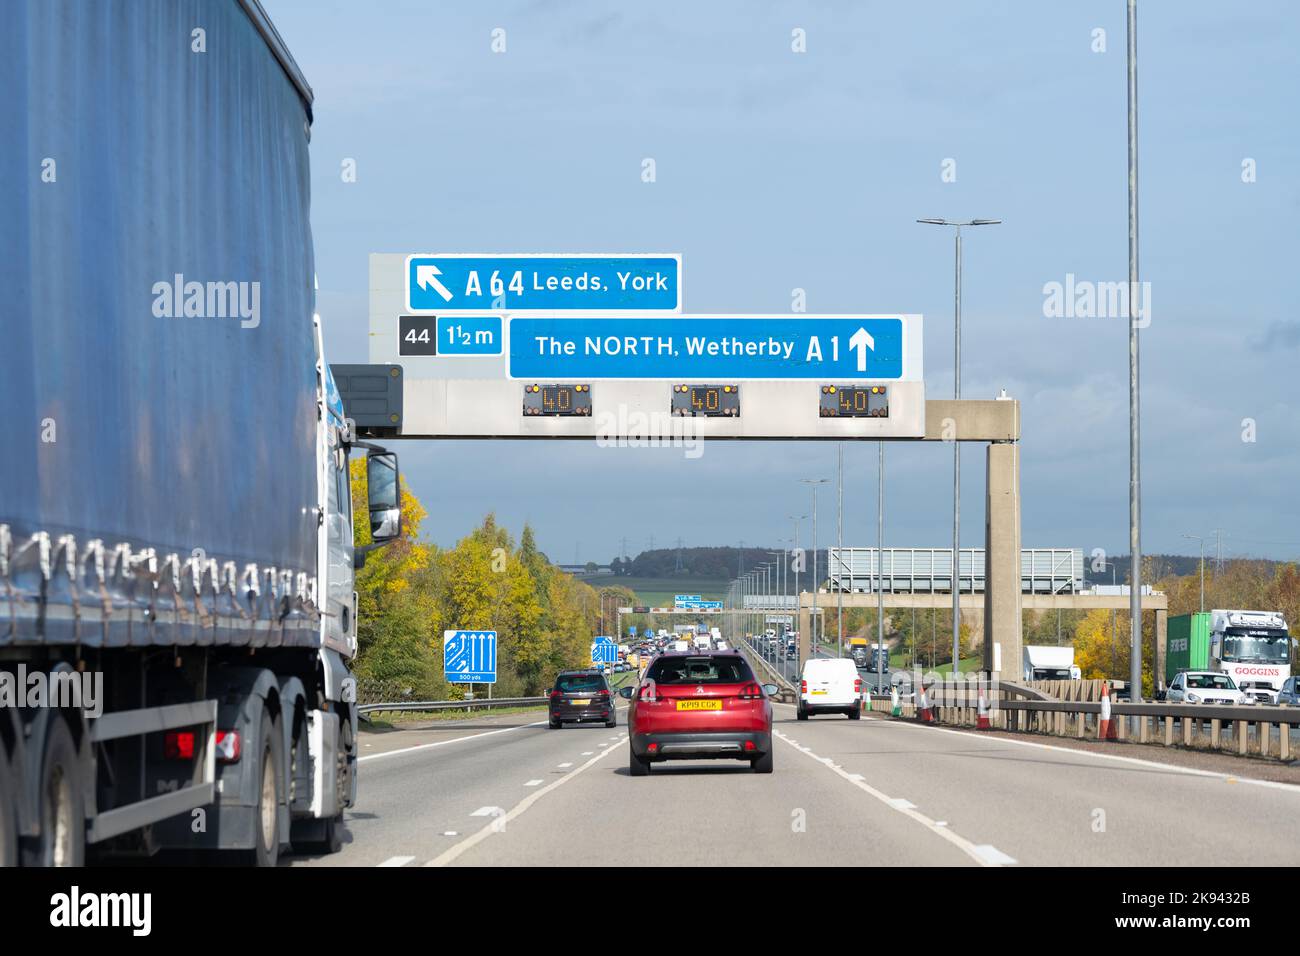 A1 motorway traffic northbound junction 44 A64 Leeds, York, A1 The NORTH, Wetherby sign, England, UK Stock Photo